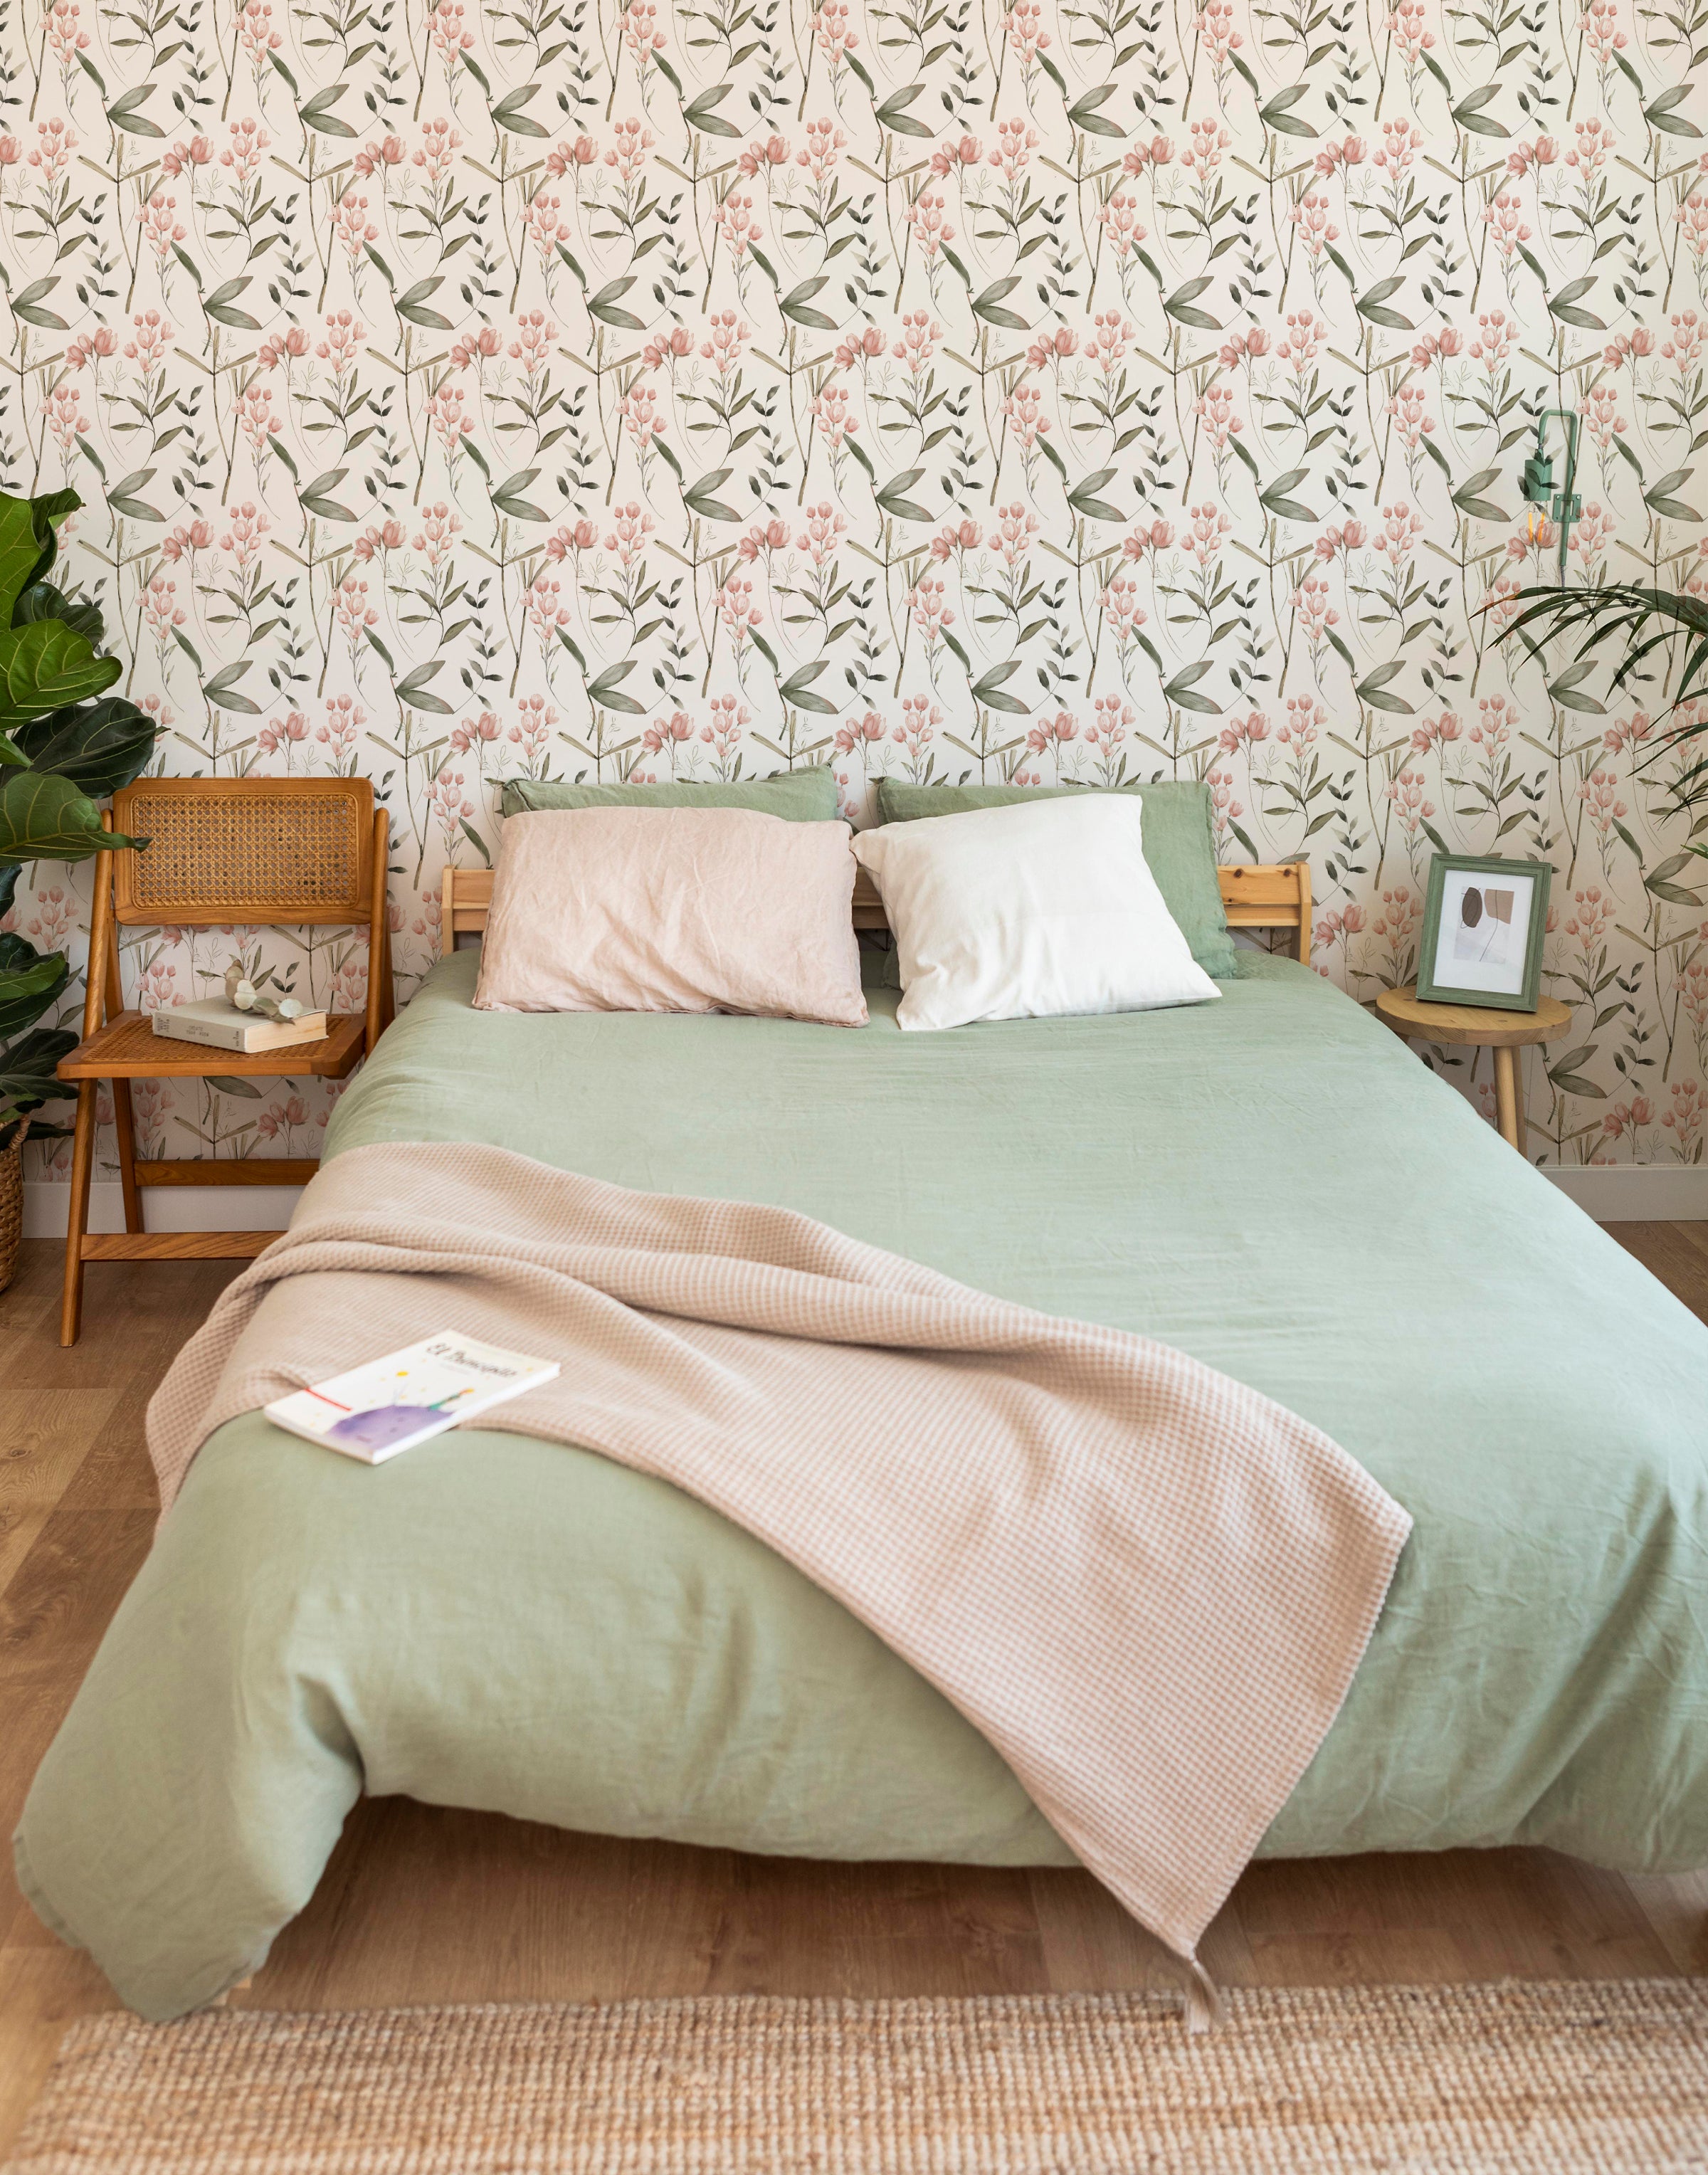 A cozy bedroom featuring the Springtime Sonata Wallpaper, adorned with a delicate pattern of pale pink tulips and lush green leaves against a white background. The elegant floral design complements the earthy tones of the green bedspread and natural wood furniture, creating a tranquil and inviting space.